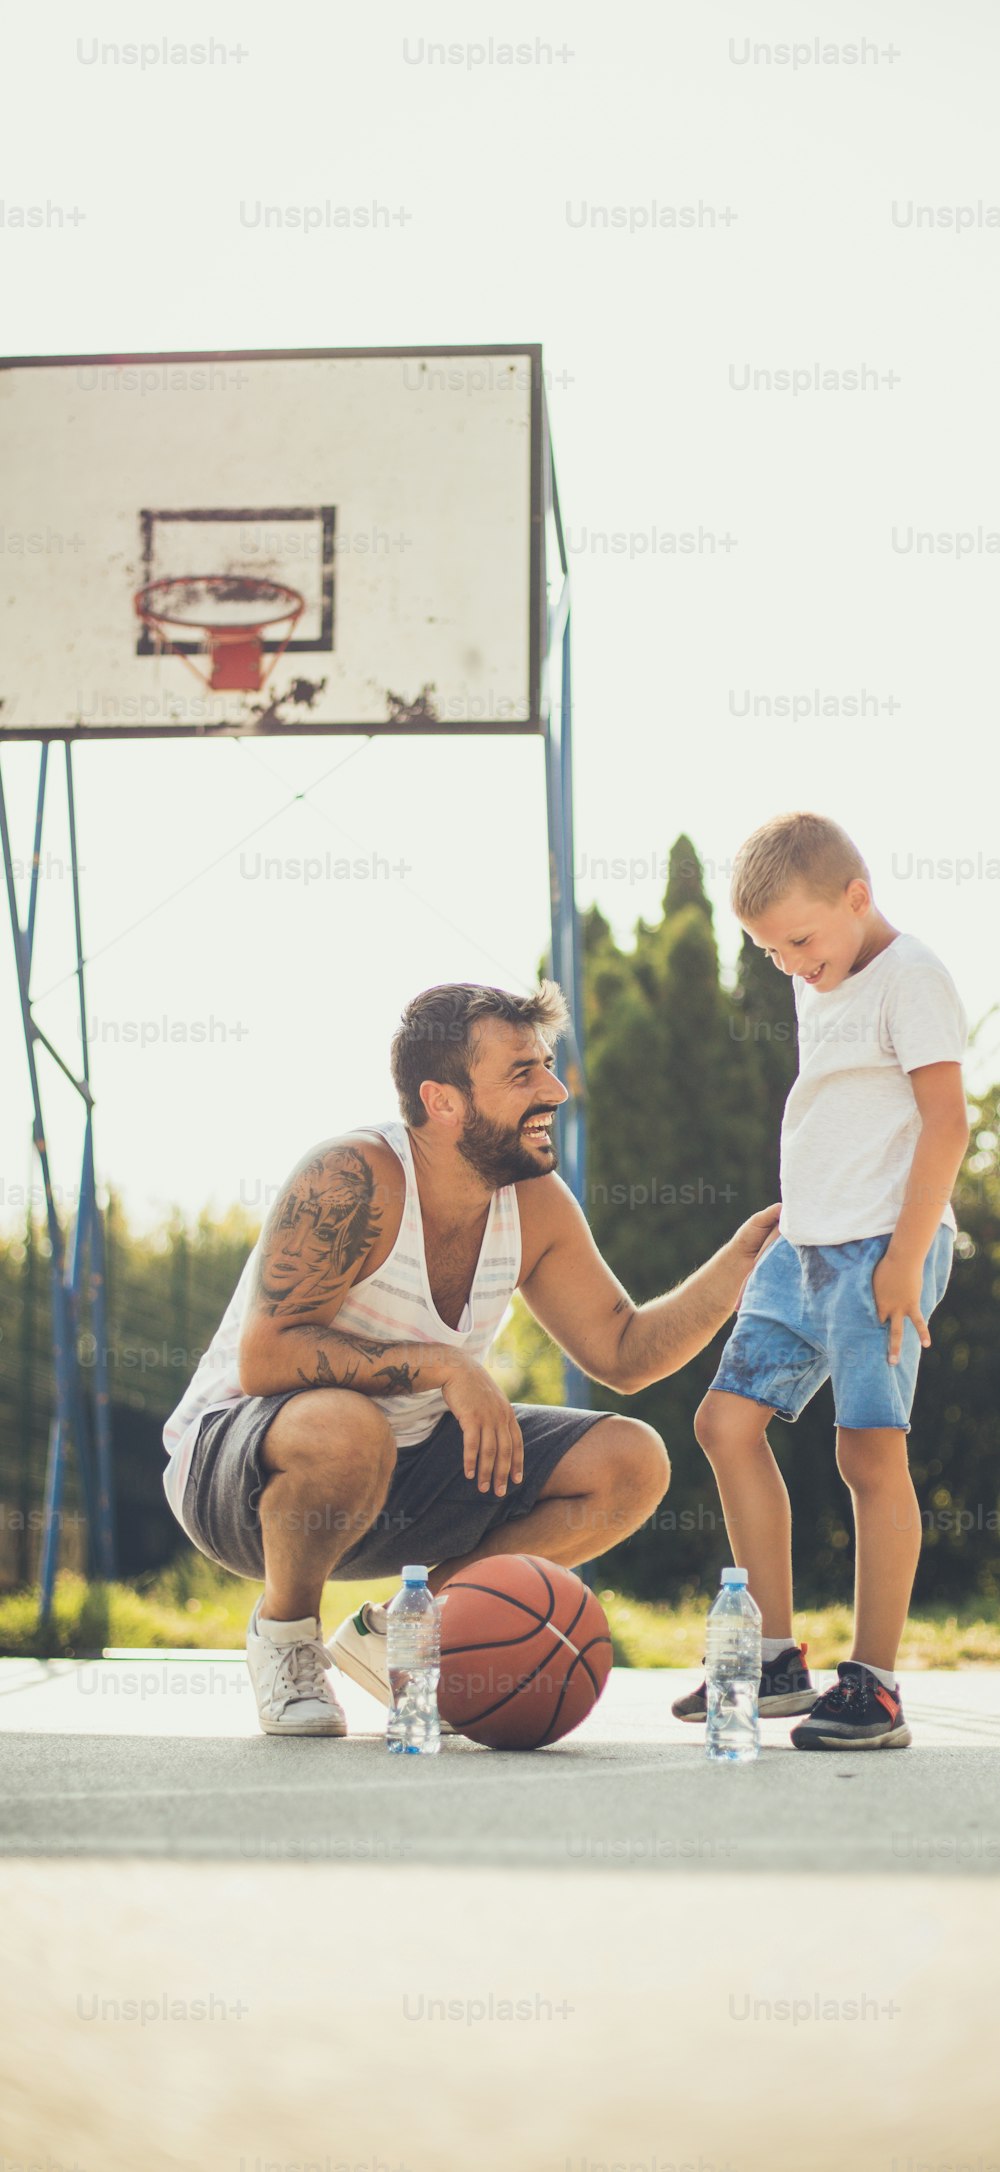 Game for men. Father and son on basket court.